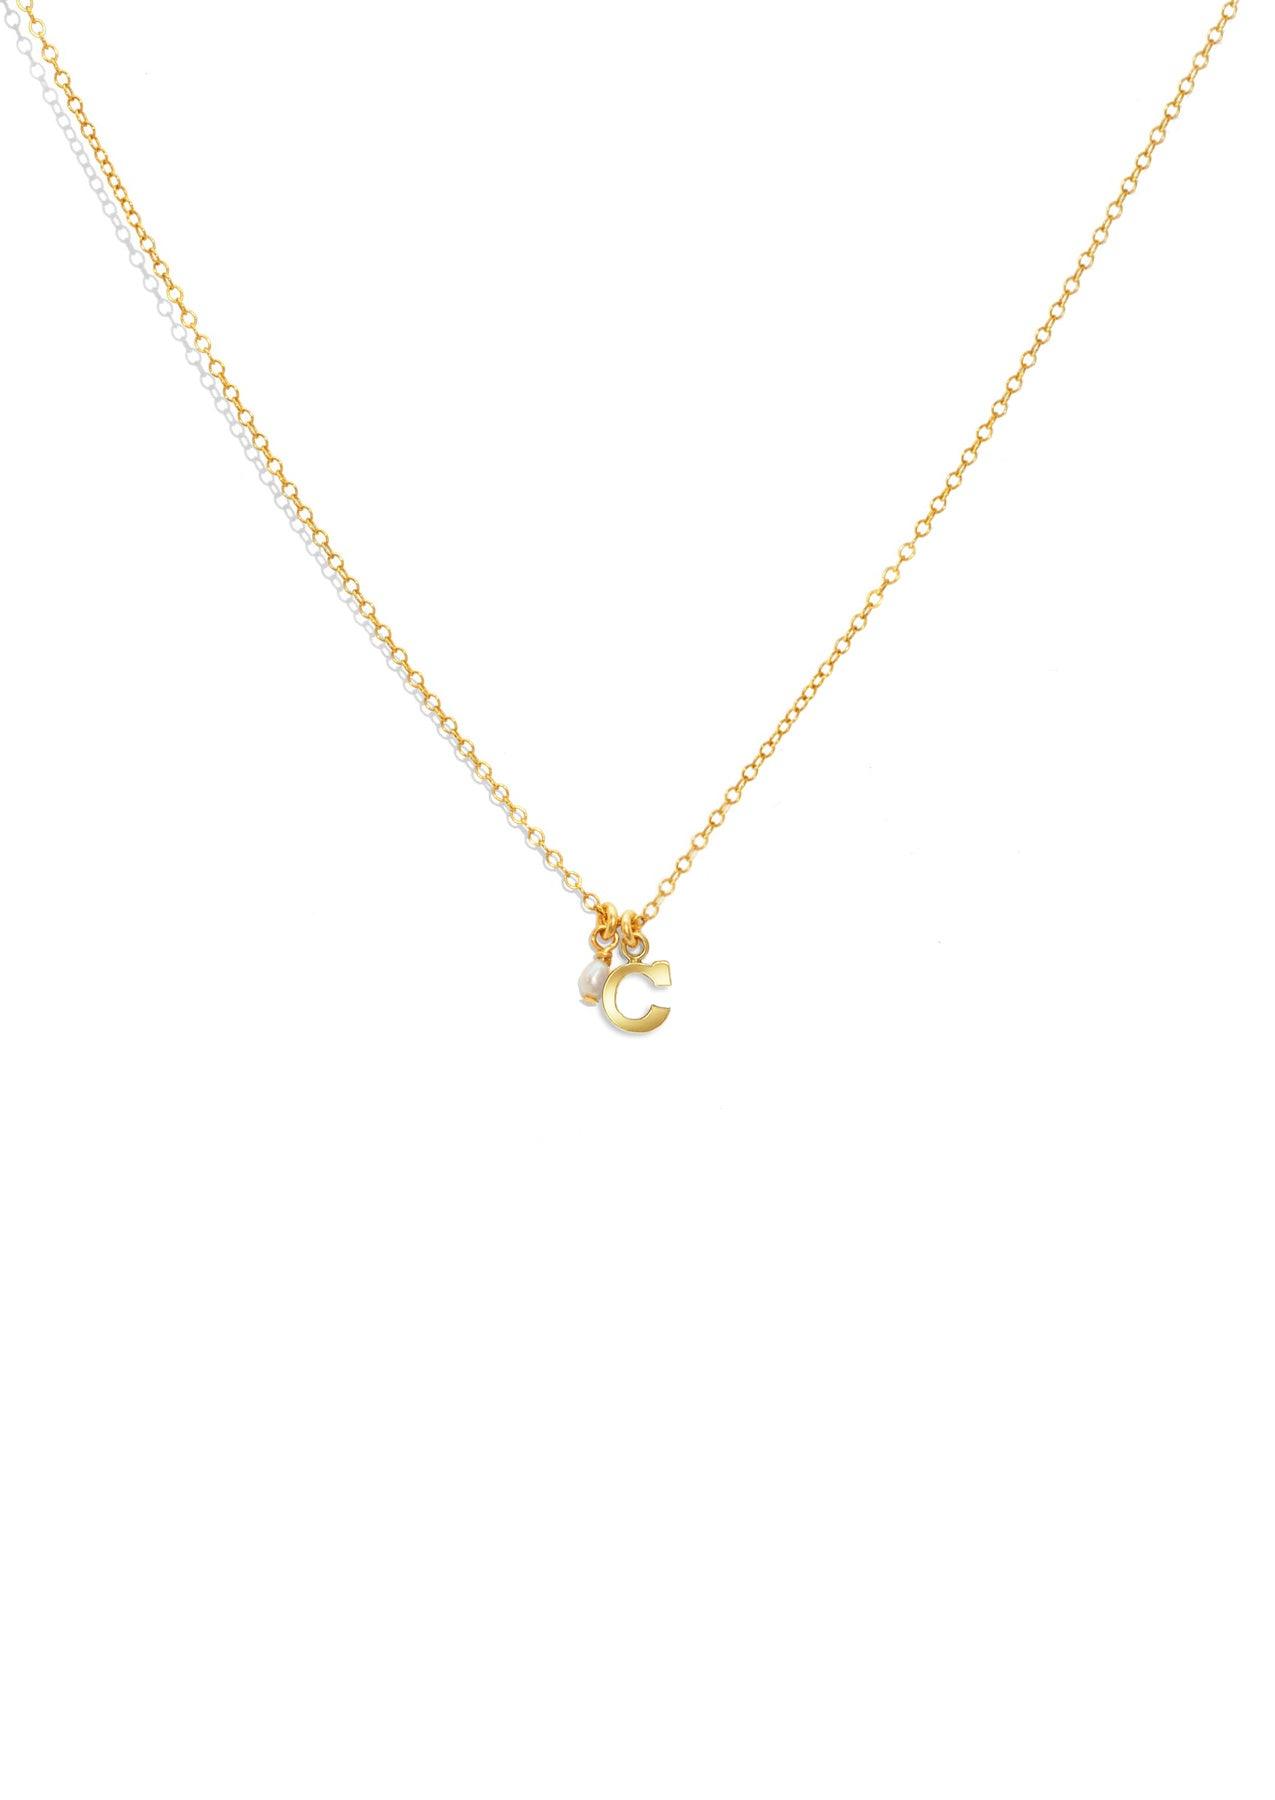 The Gold Initial Charm Necklace